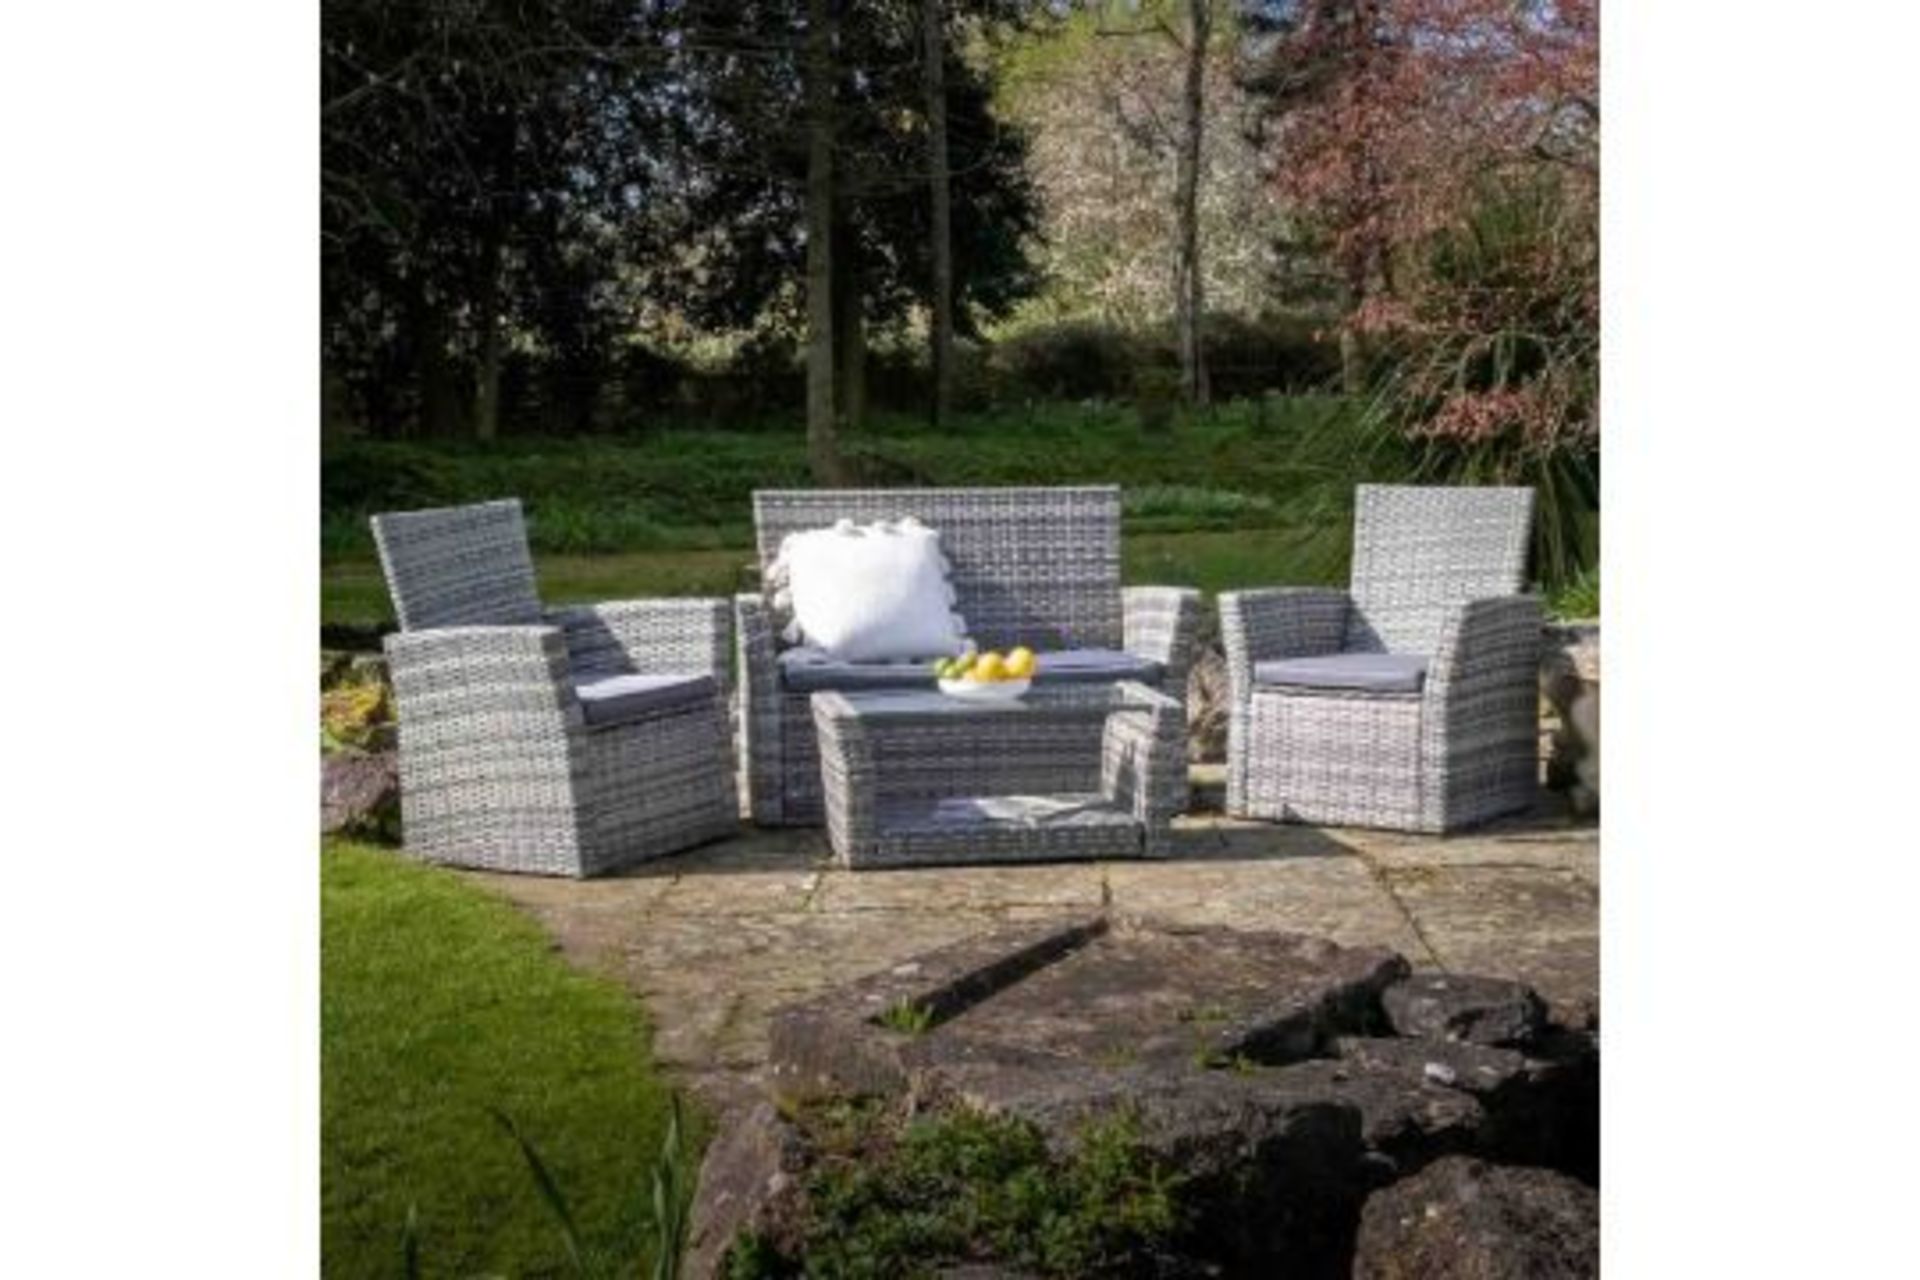 New Boxed Corfo 4 Seater Garden Furniture Set in Grey. The 4-piece garden furniture set includes a